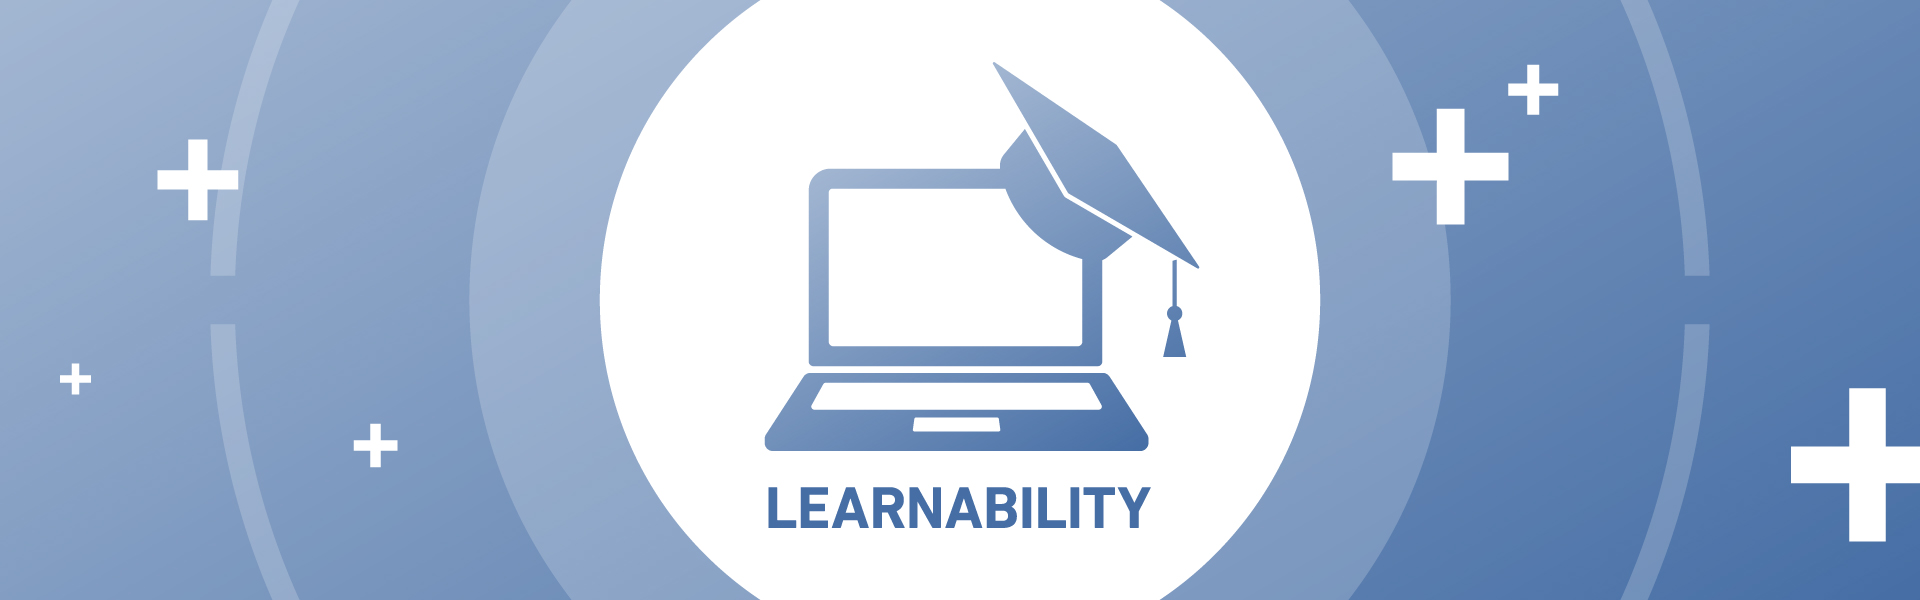 Why Learnability is Increasingly Important in the Job Search Process